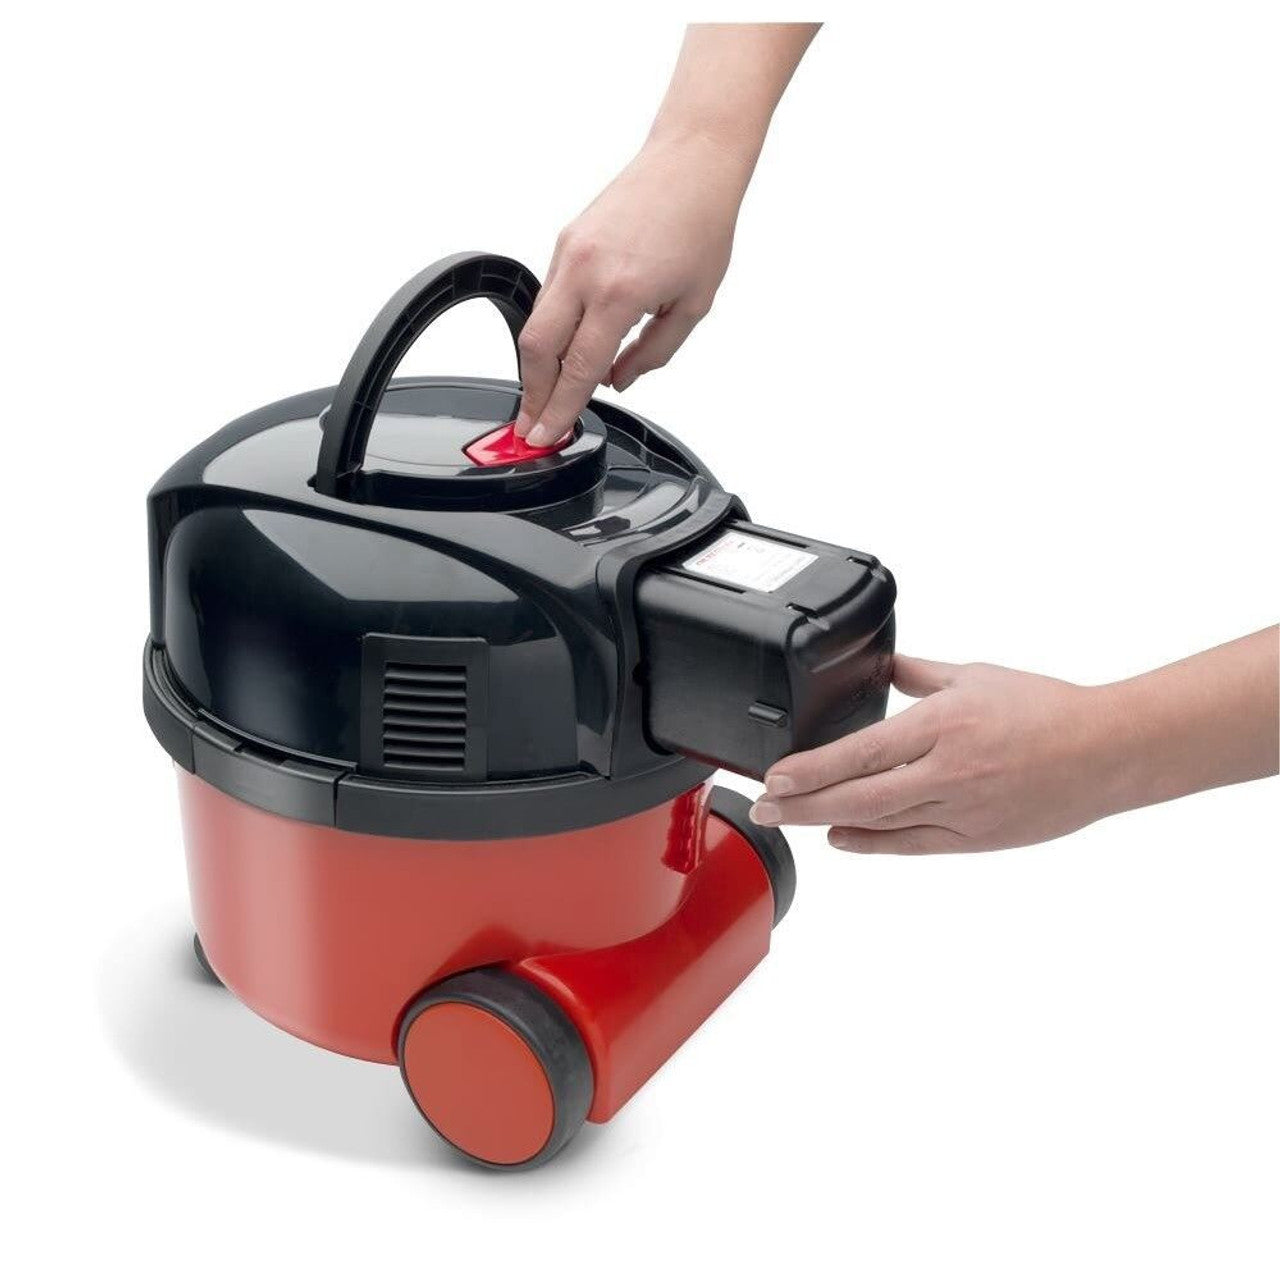 Numatic Henry NBV190NX With NX300 Li-Ion Battery and Vacuum Cleaner Combo.